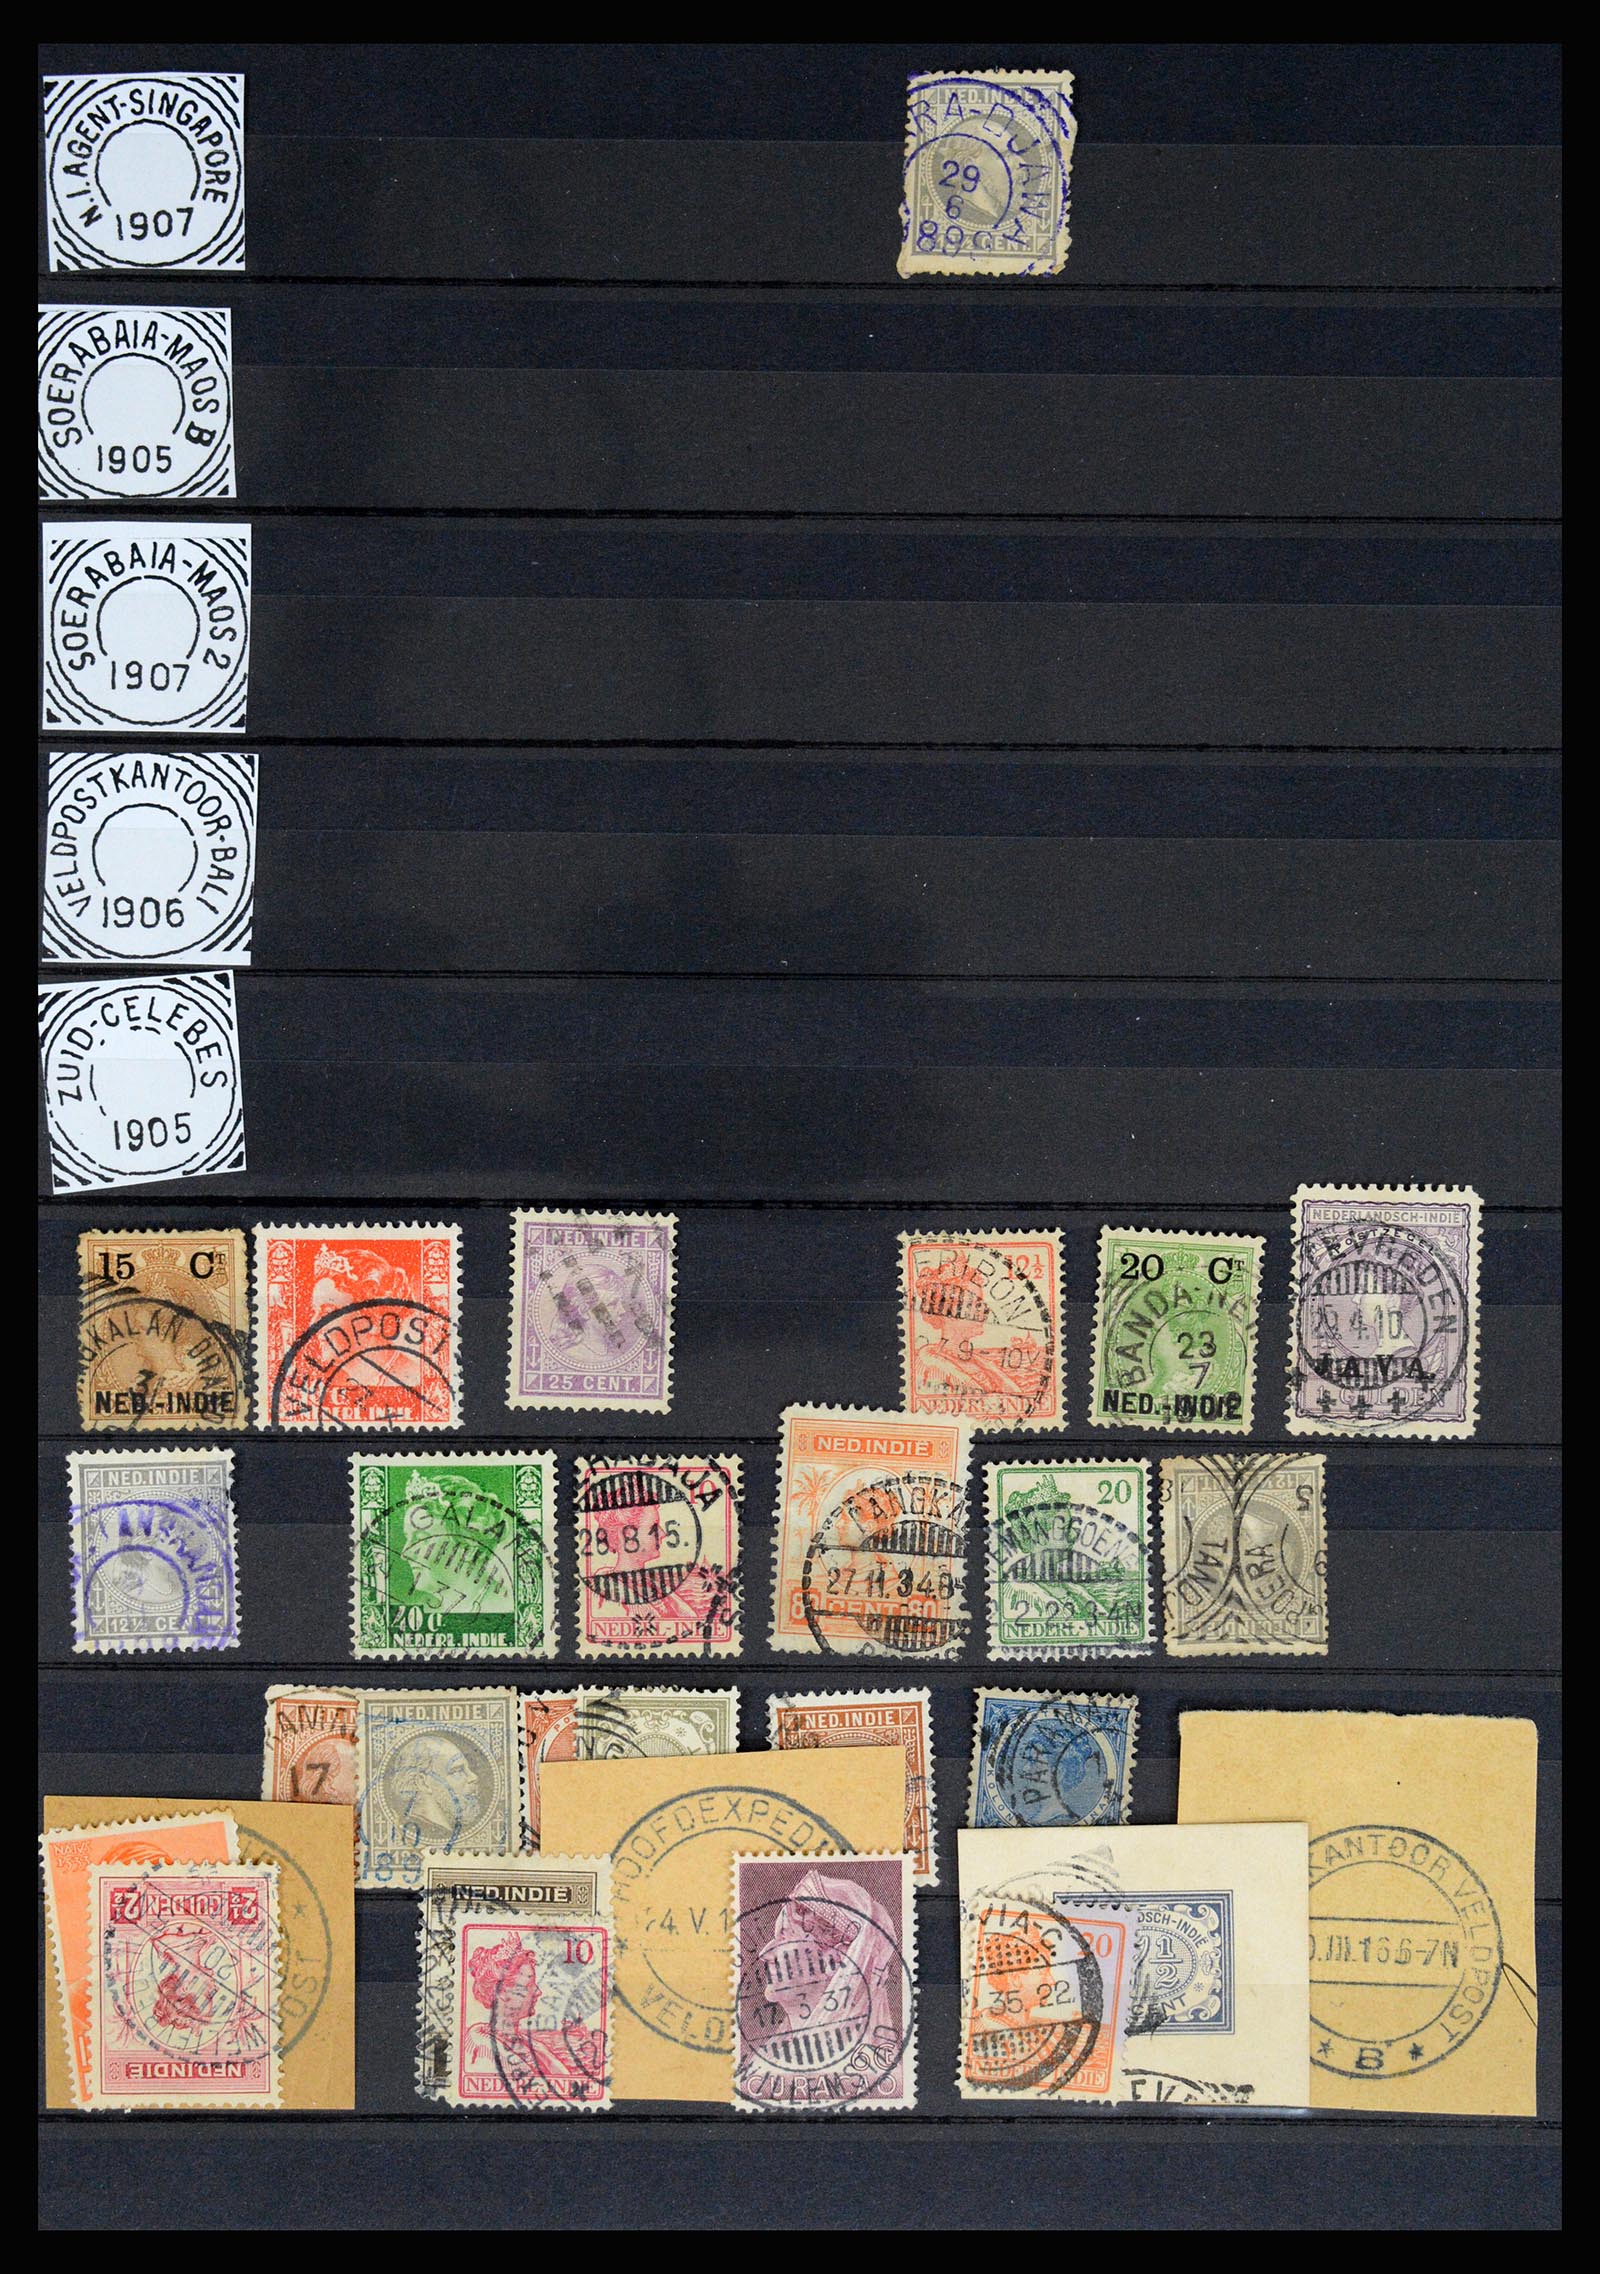 36839 059 - Stamp collection 36839 Dutch east Indies square cancels.